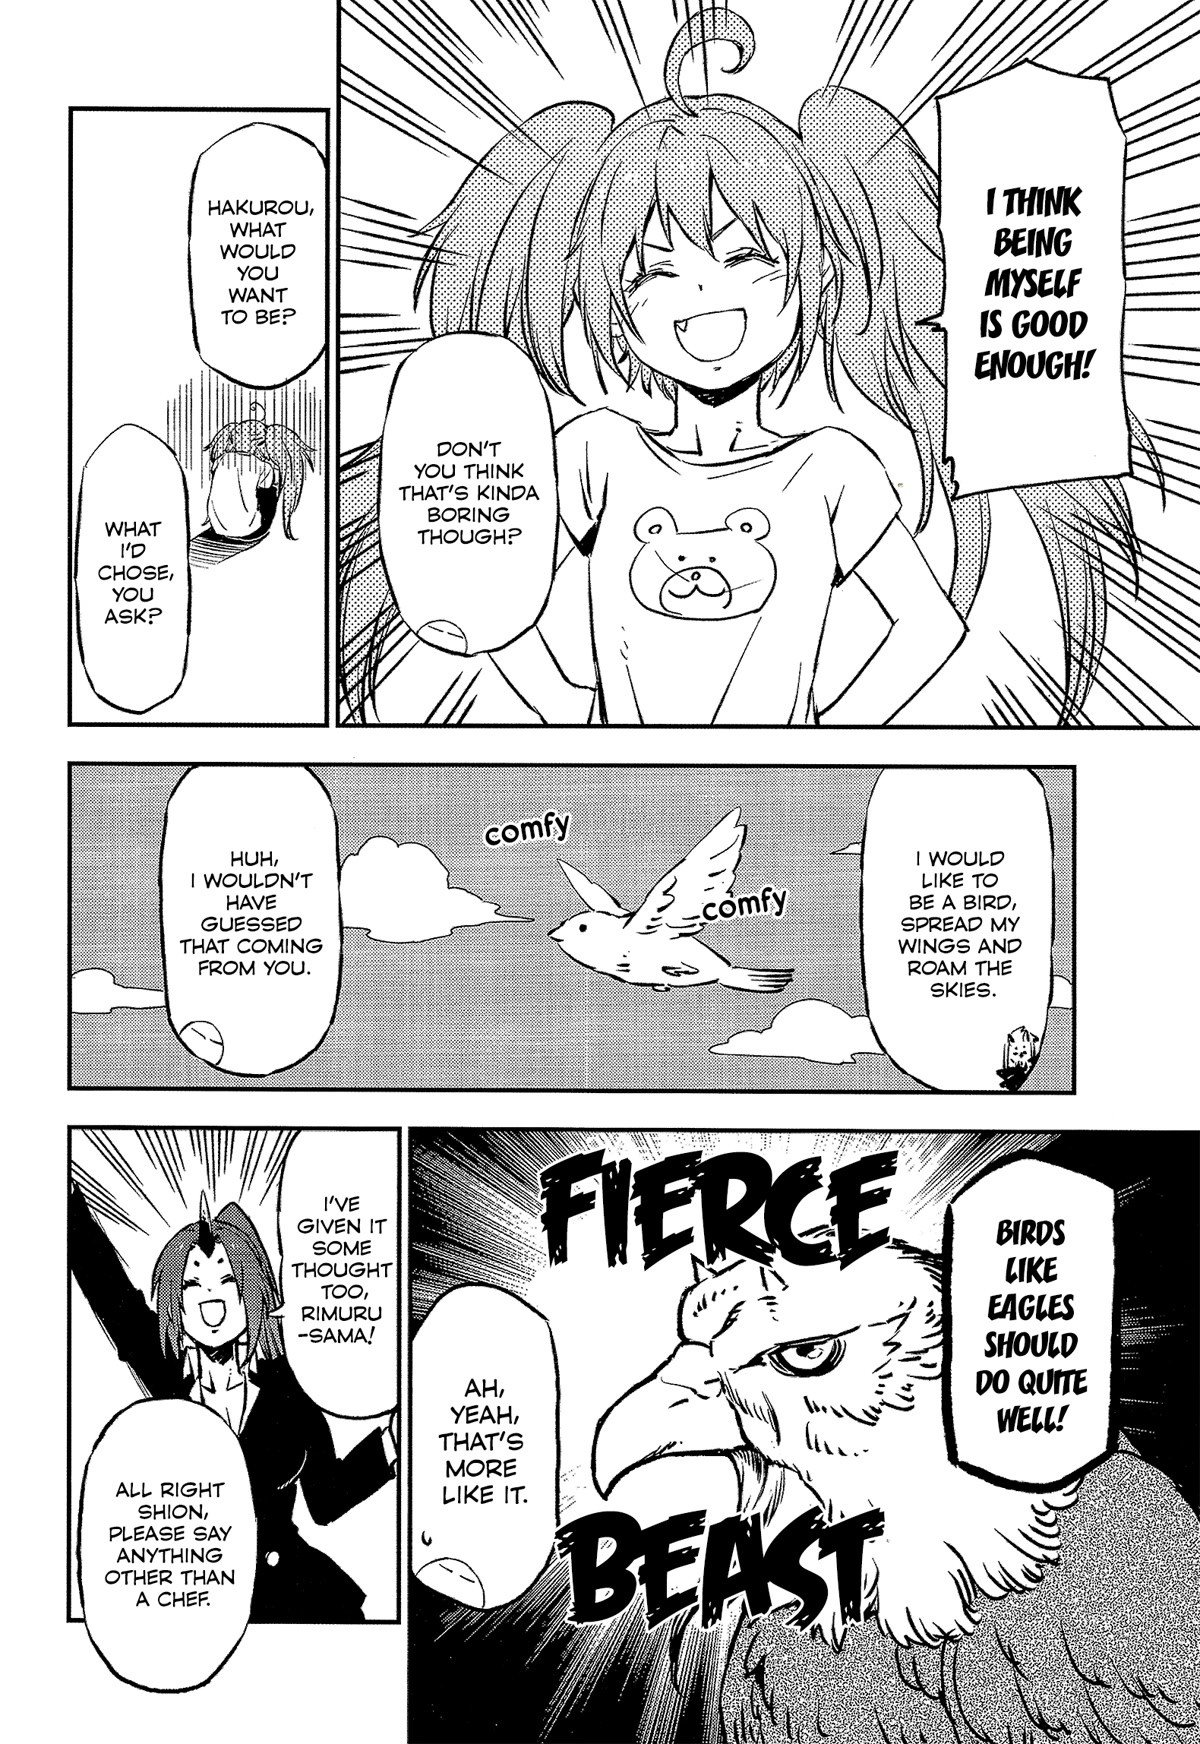 That Time I Got Reincarnated As A Slime - Tensura Short Stories - Page 3